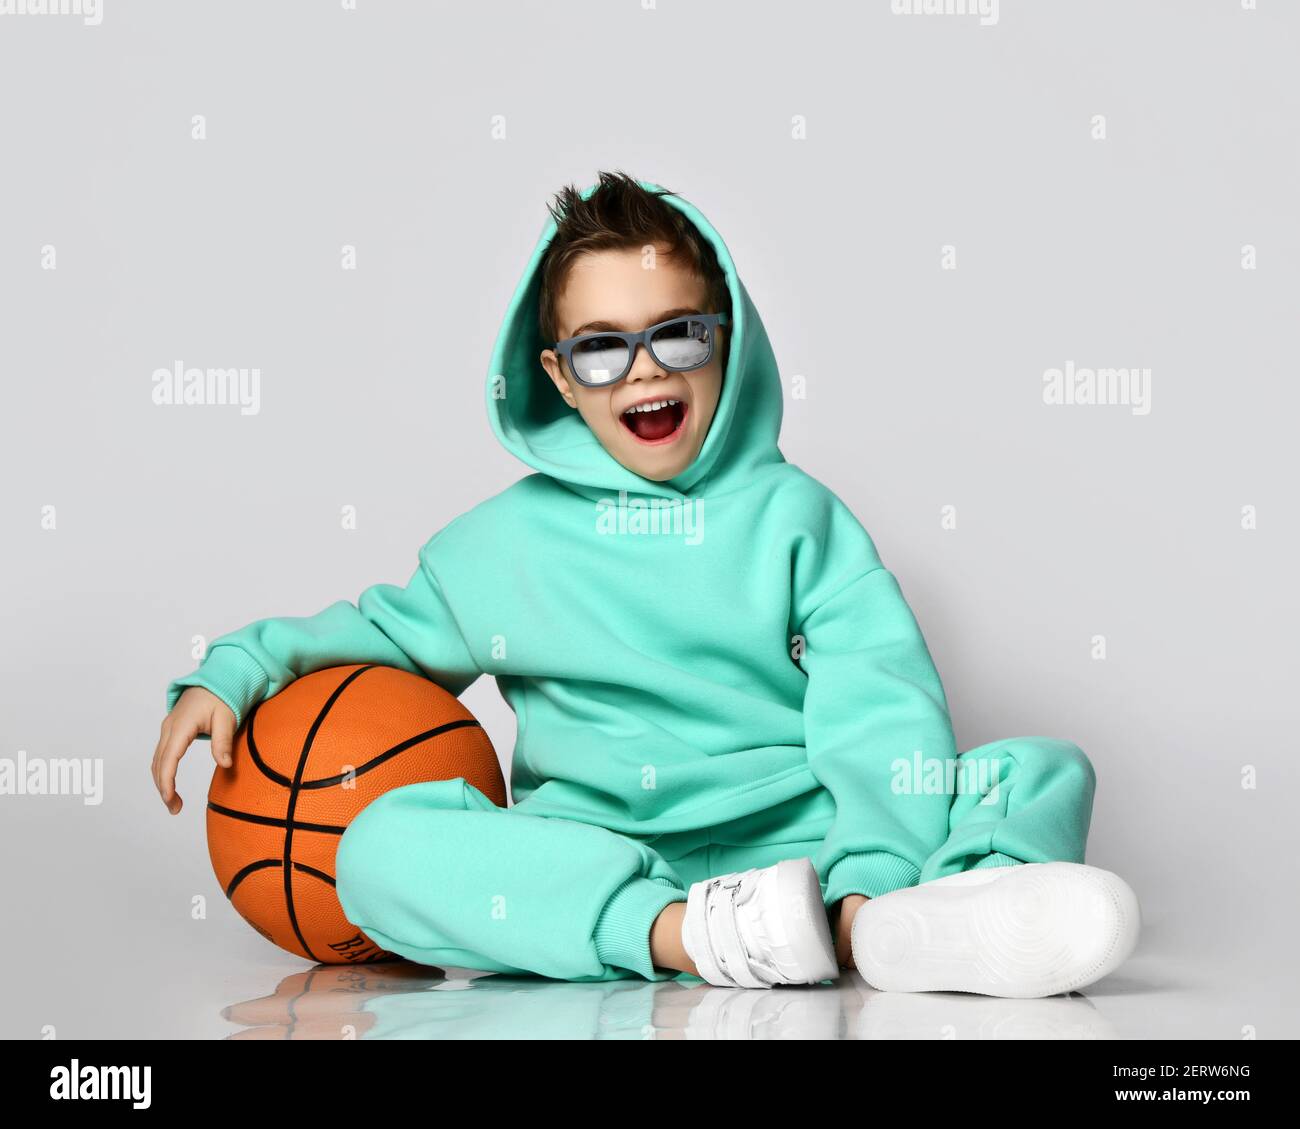 Happy screaming laughing frolic active kid boy in modern green, mint color sportswear hoodie, pants and sneakers sitting with basketball and his hood Stock Photo